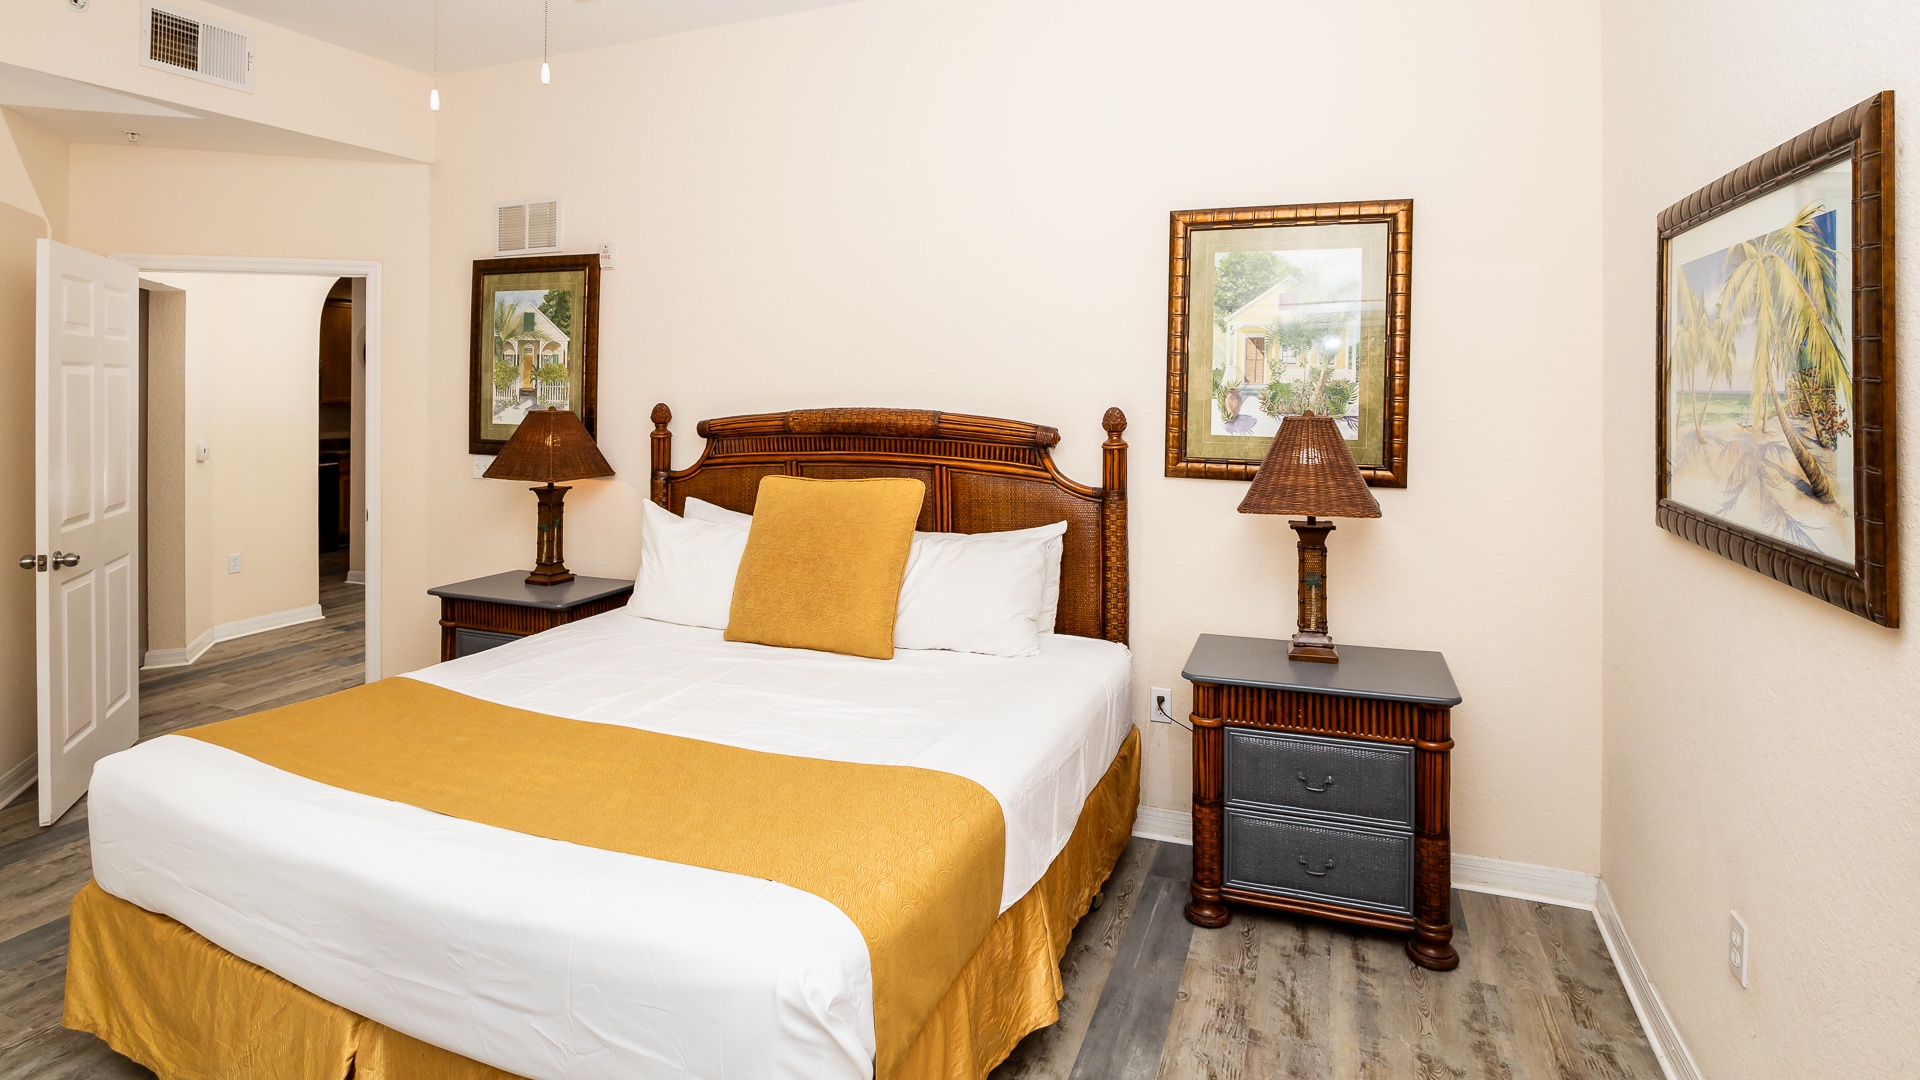 The primary suite boasts a king bed, patio access, private ensuite & TV